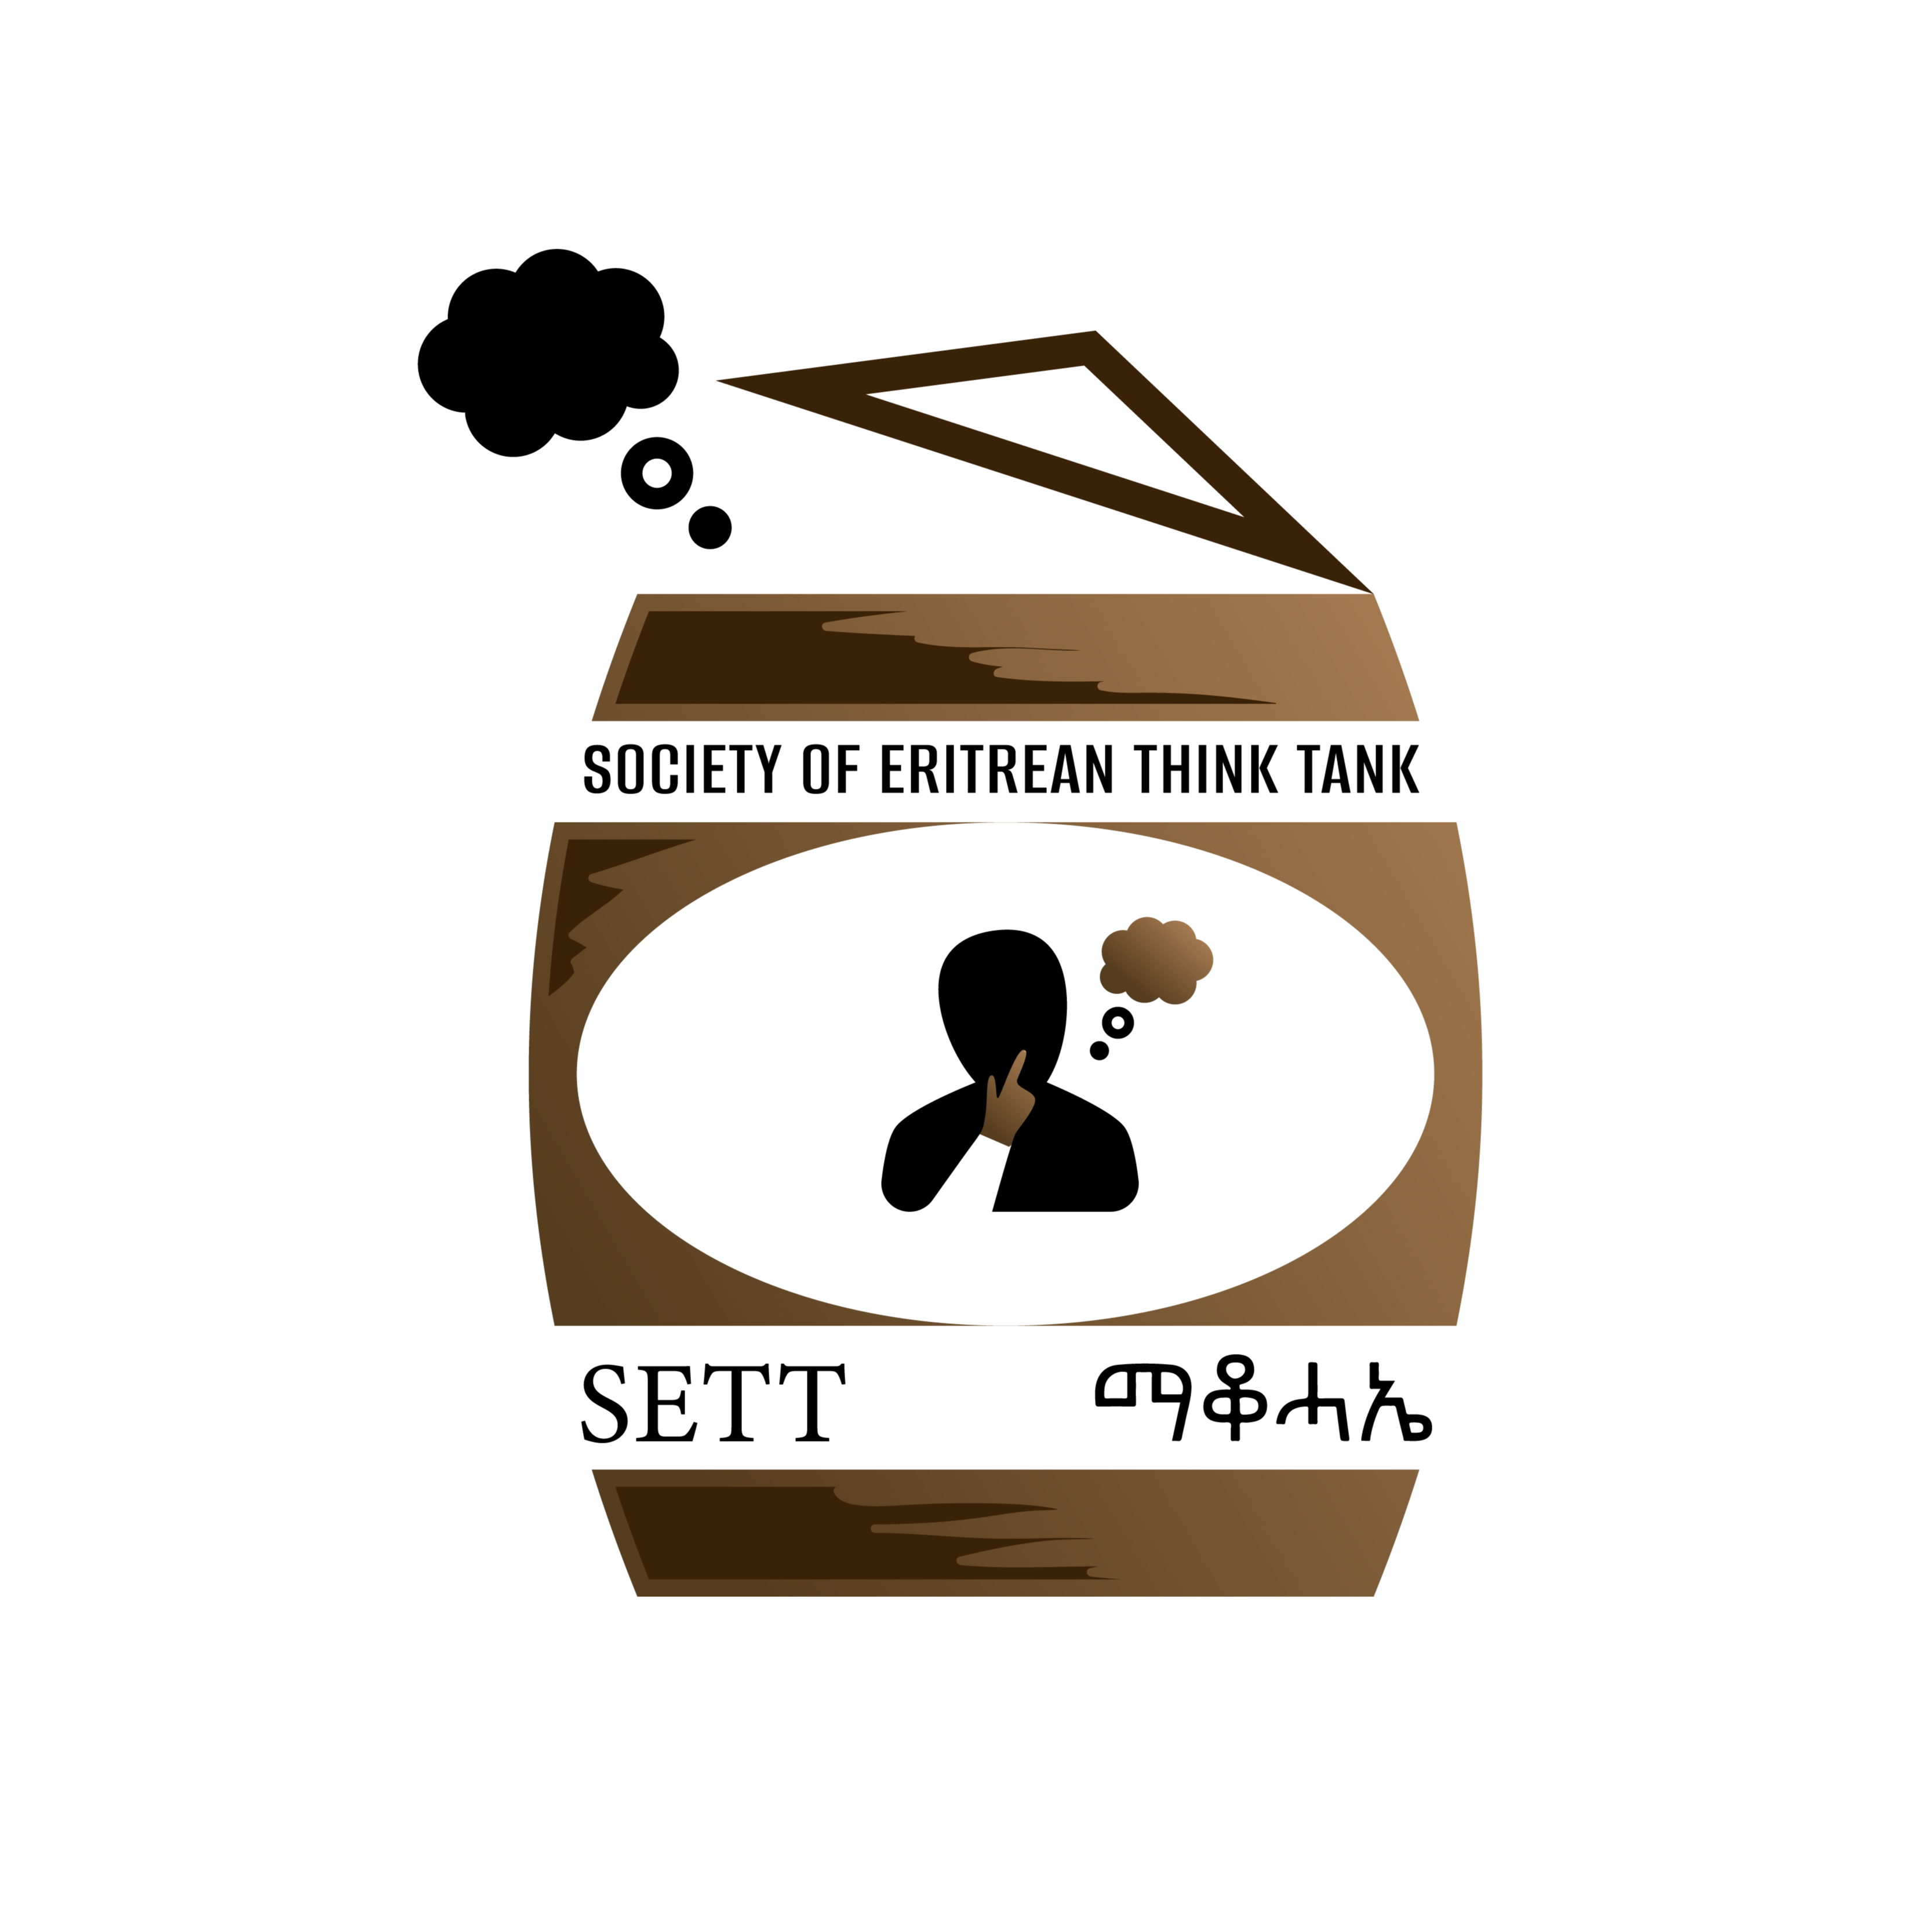 The Society of Eritrean Think Tank (SETT) - Our Principles